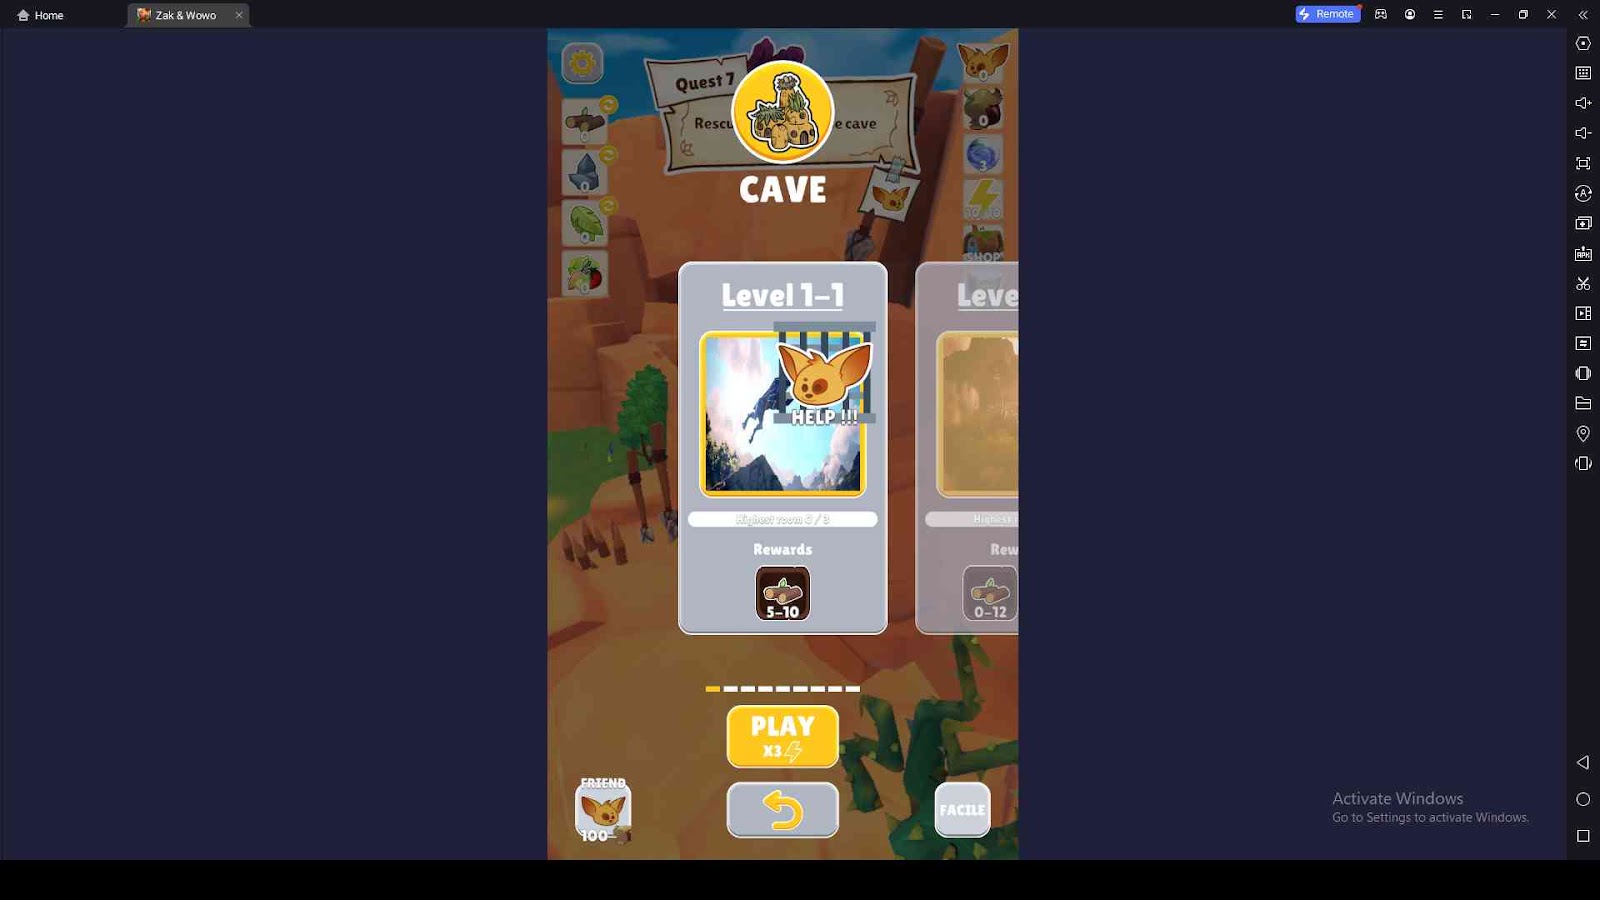 Enter the Caves for More Rewards